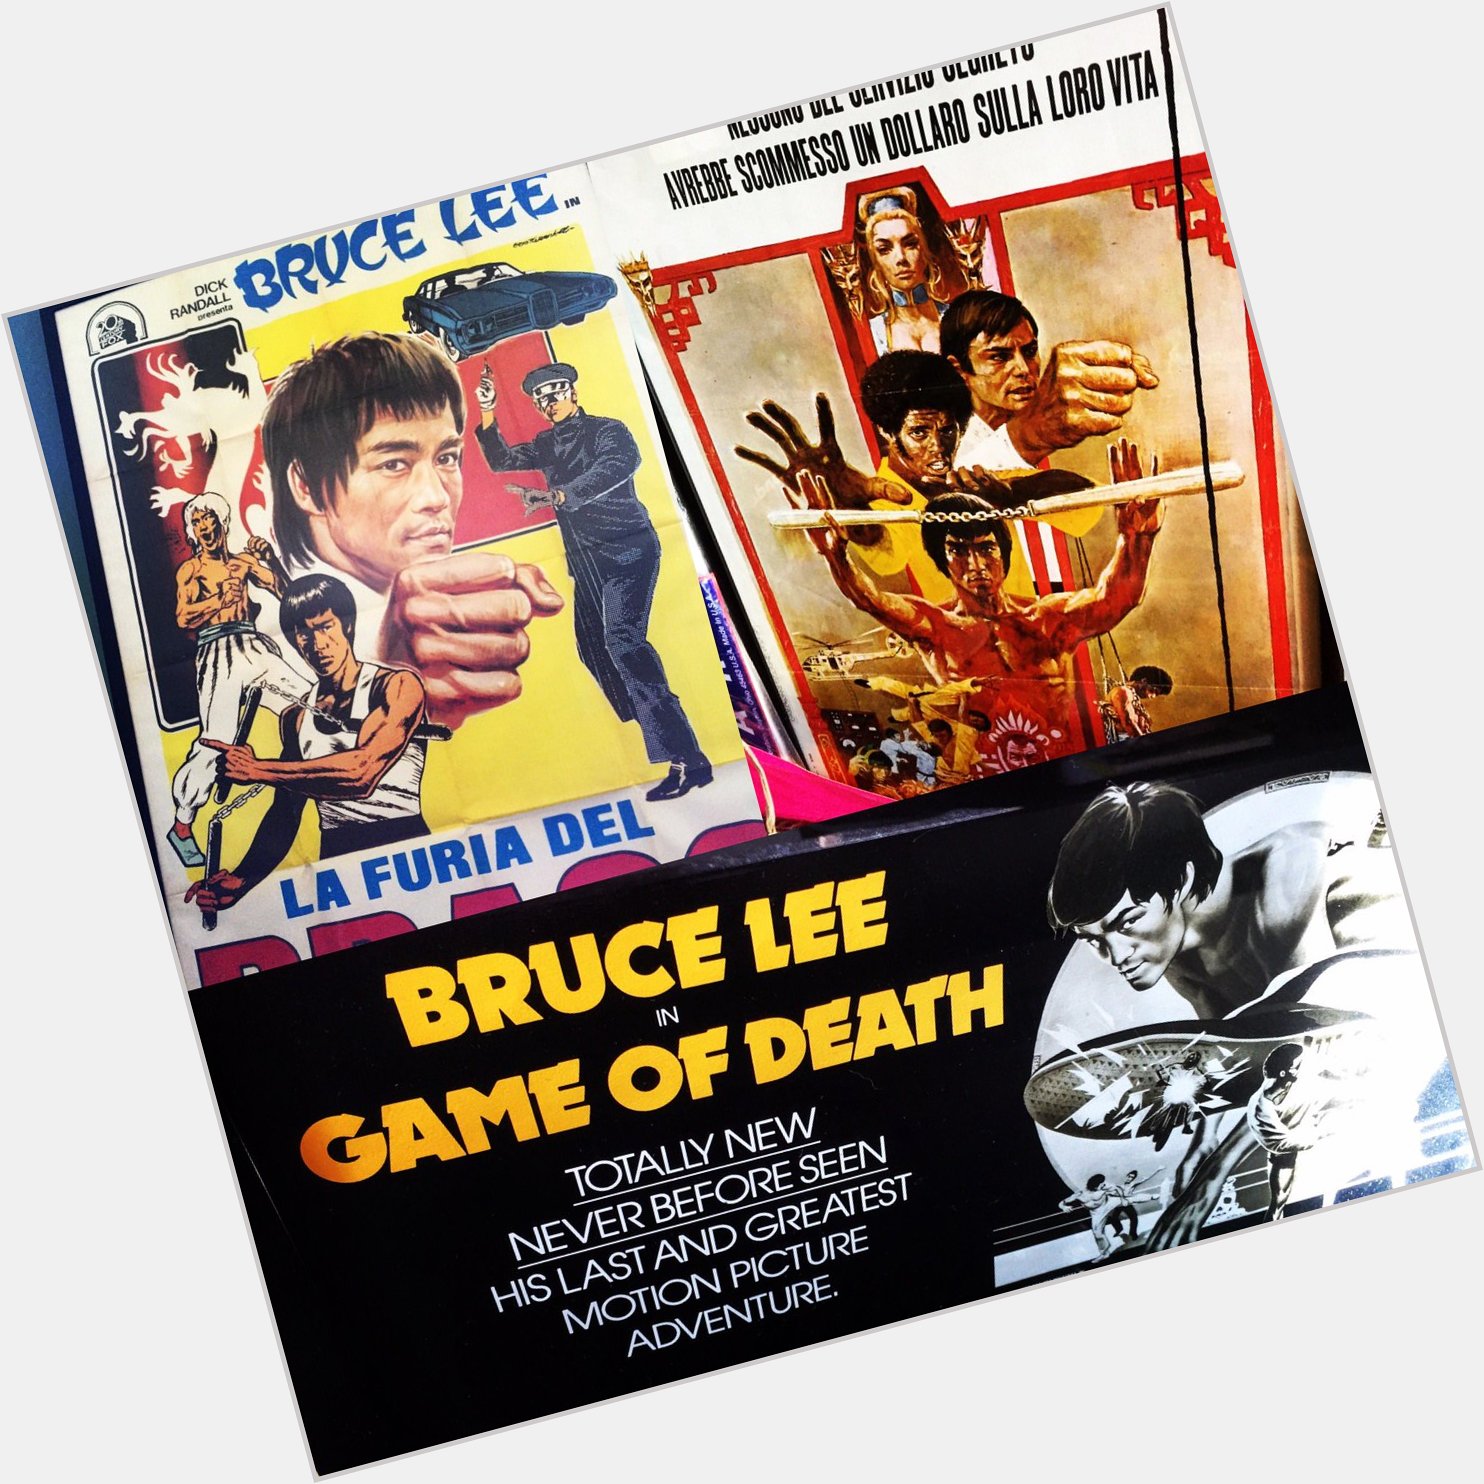 Happy Birthday to Bruce Lee! 
Some of Bruce\s original movie posters hanging on my walls. 